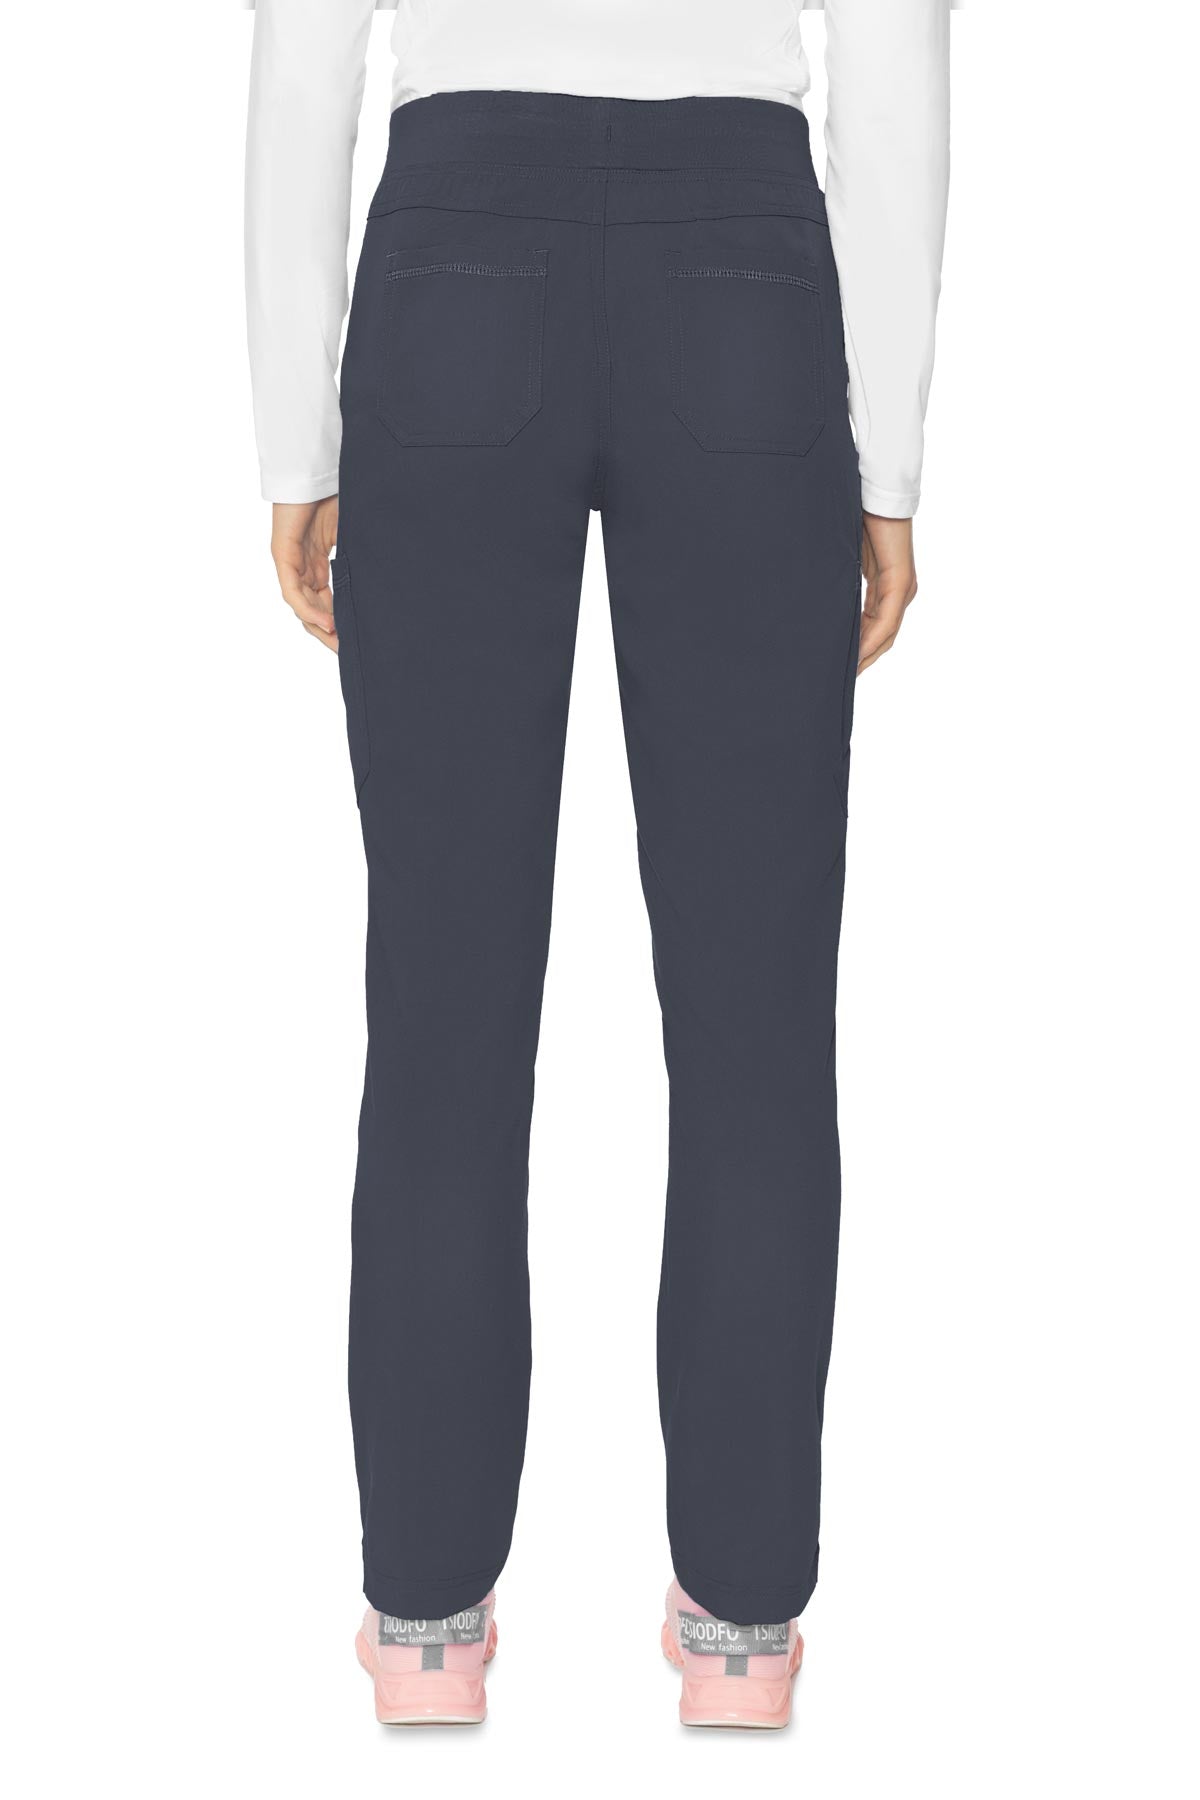 Med Couture Touch 7725 Women's Yoga 2 Cargo Pant - TALL – Valley West  Uniforms